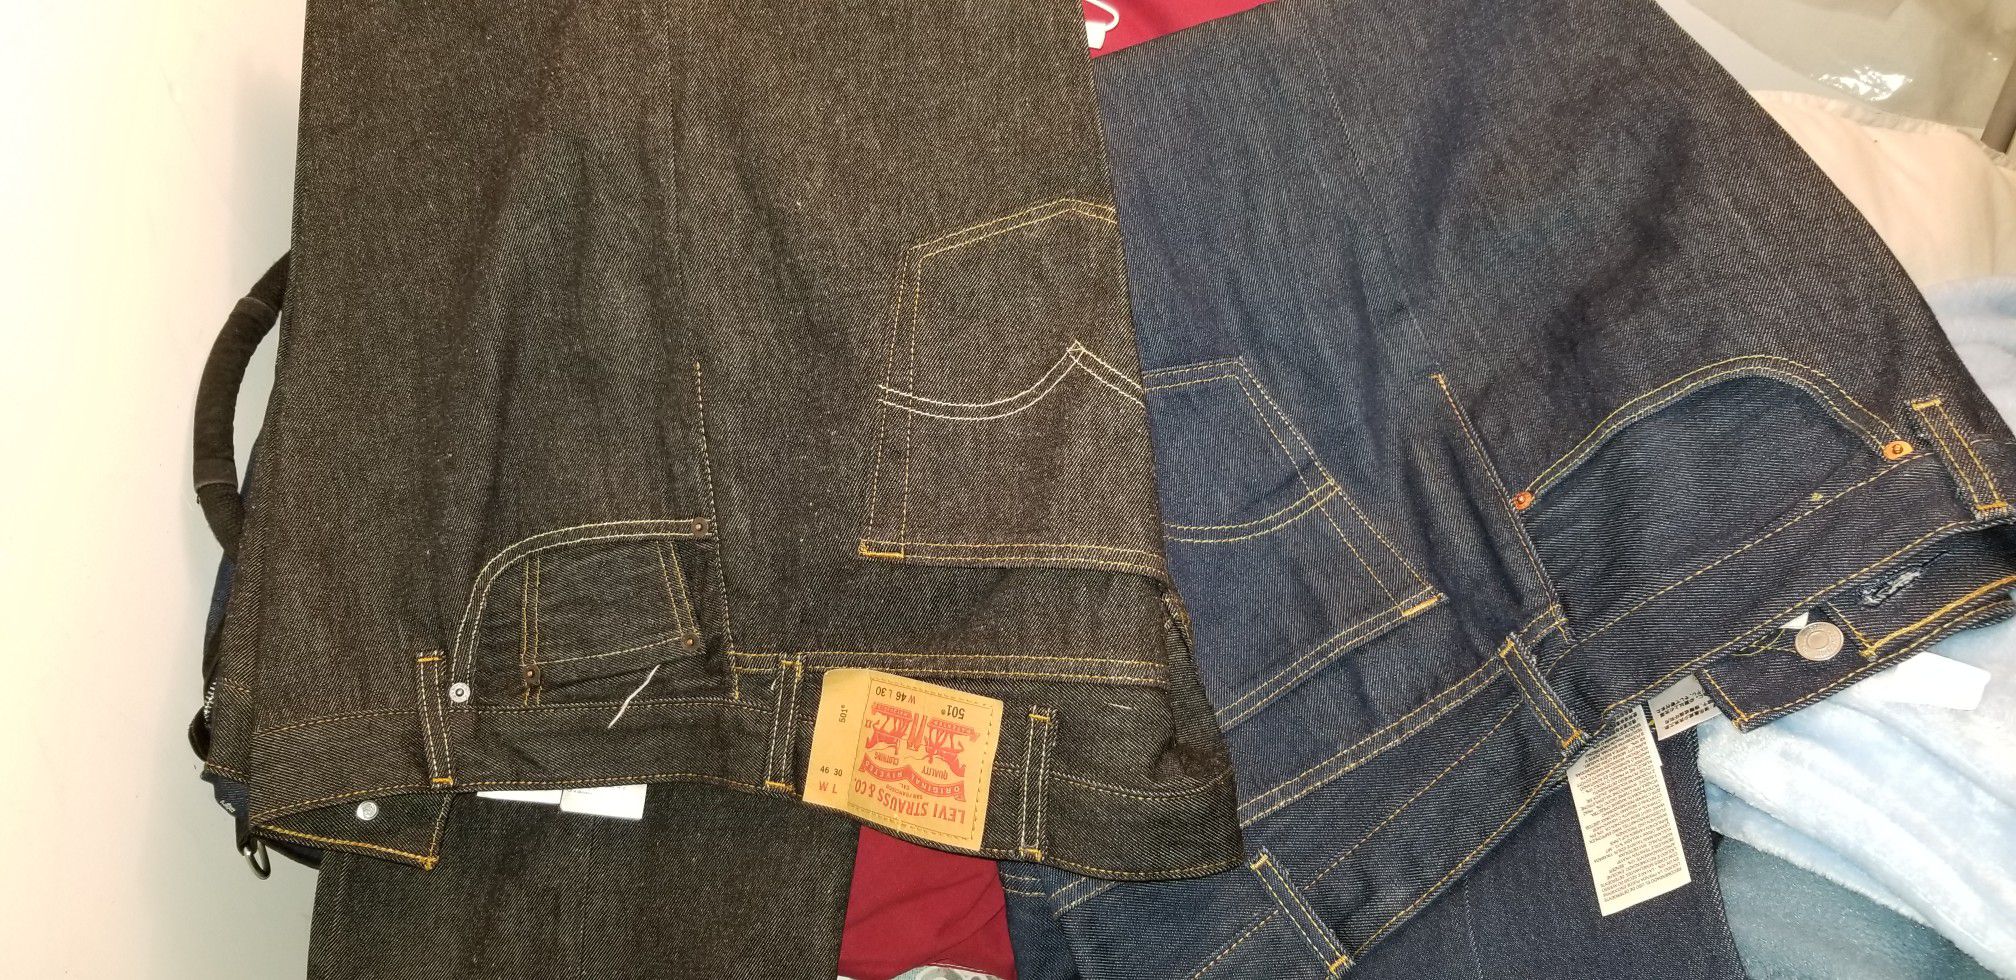 5 pair's of 501 Levi's and 4 wolverine flannels and 1pana